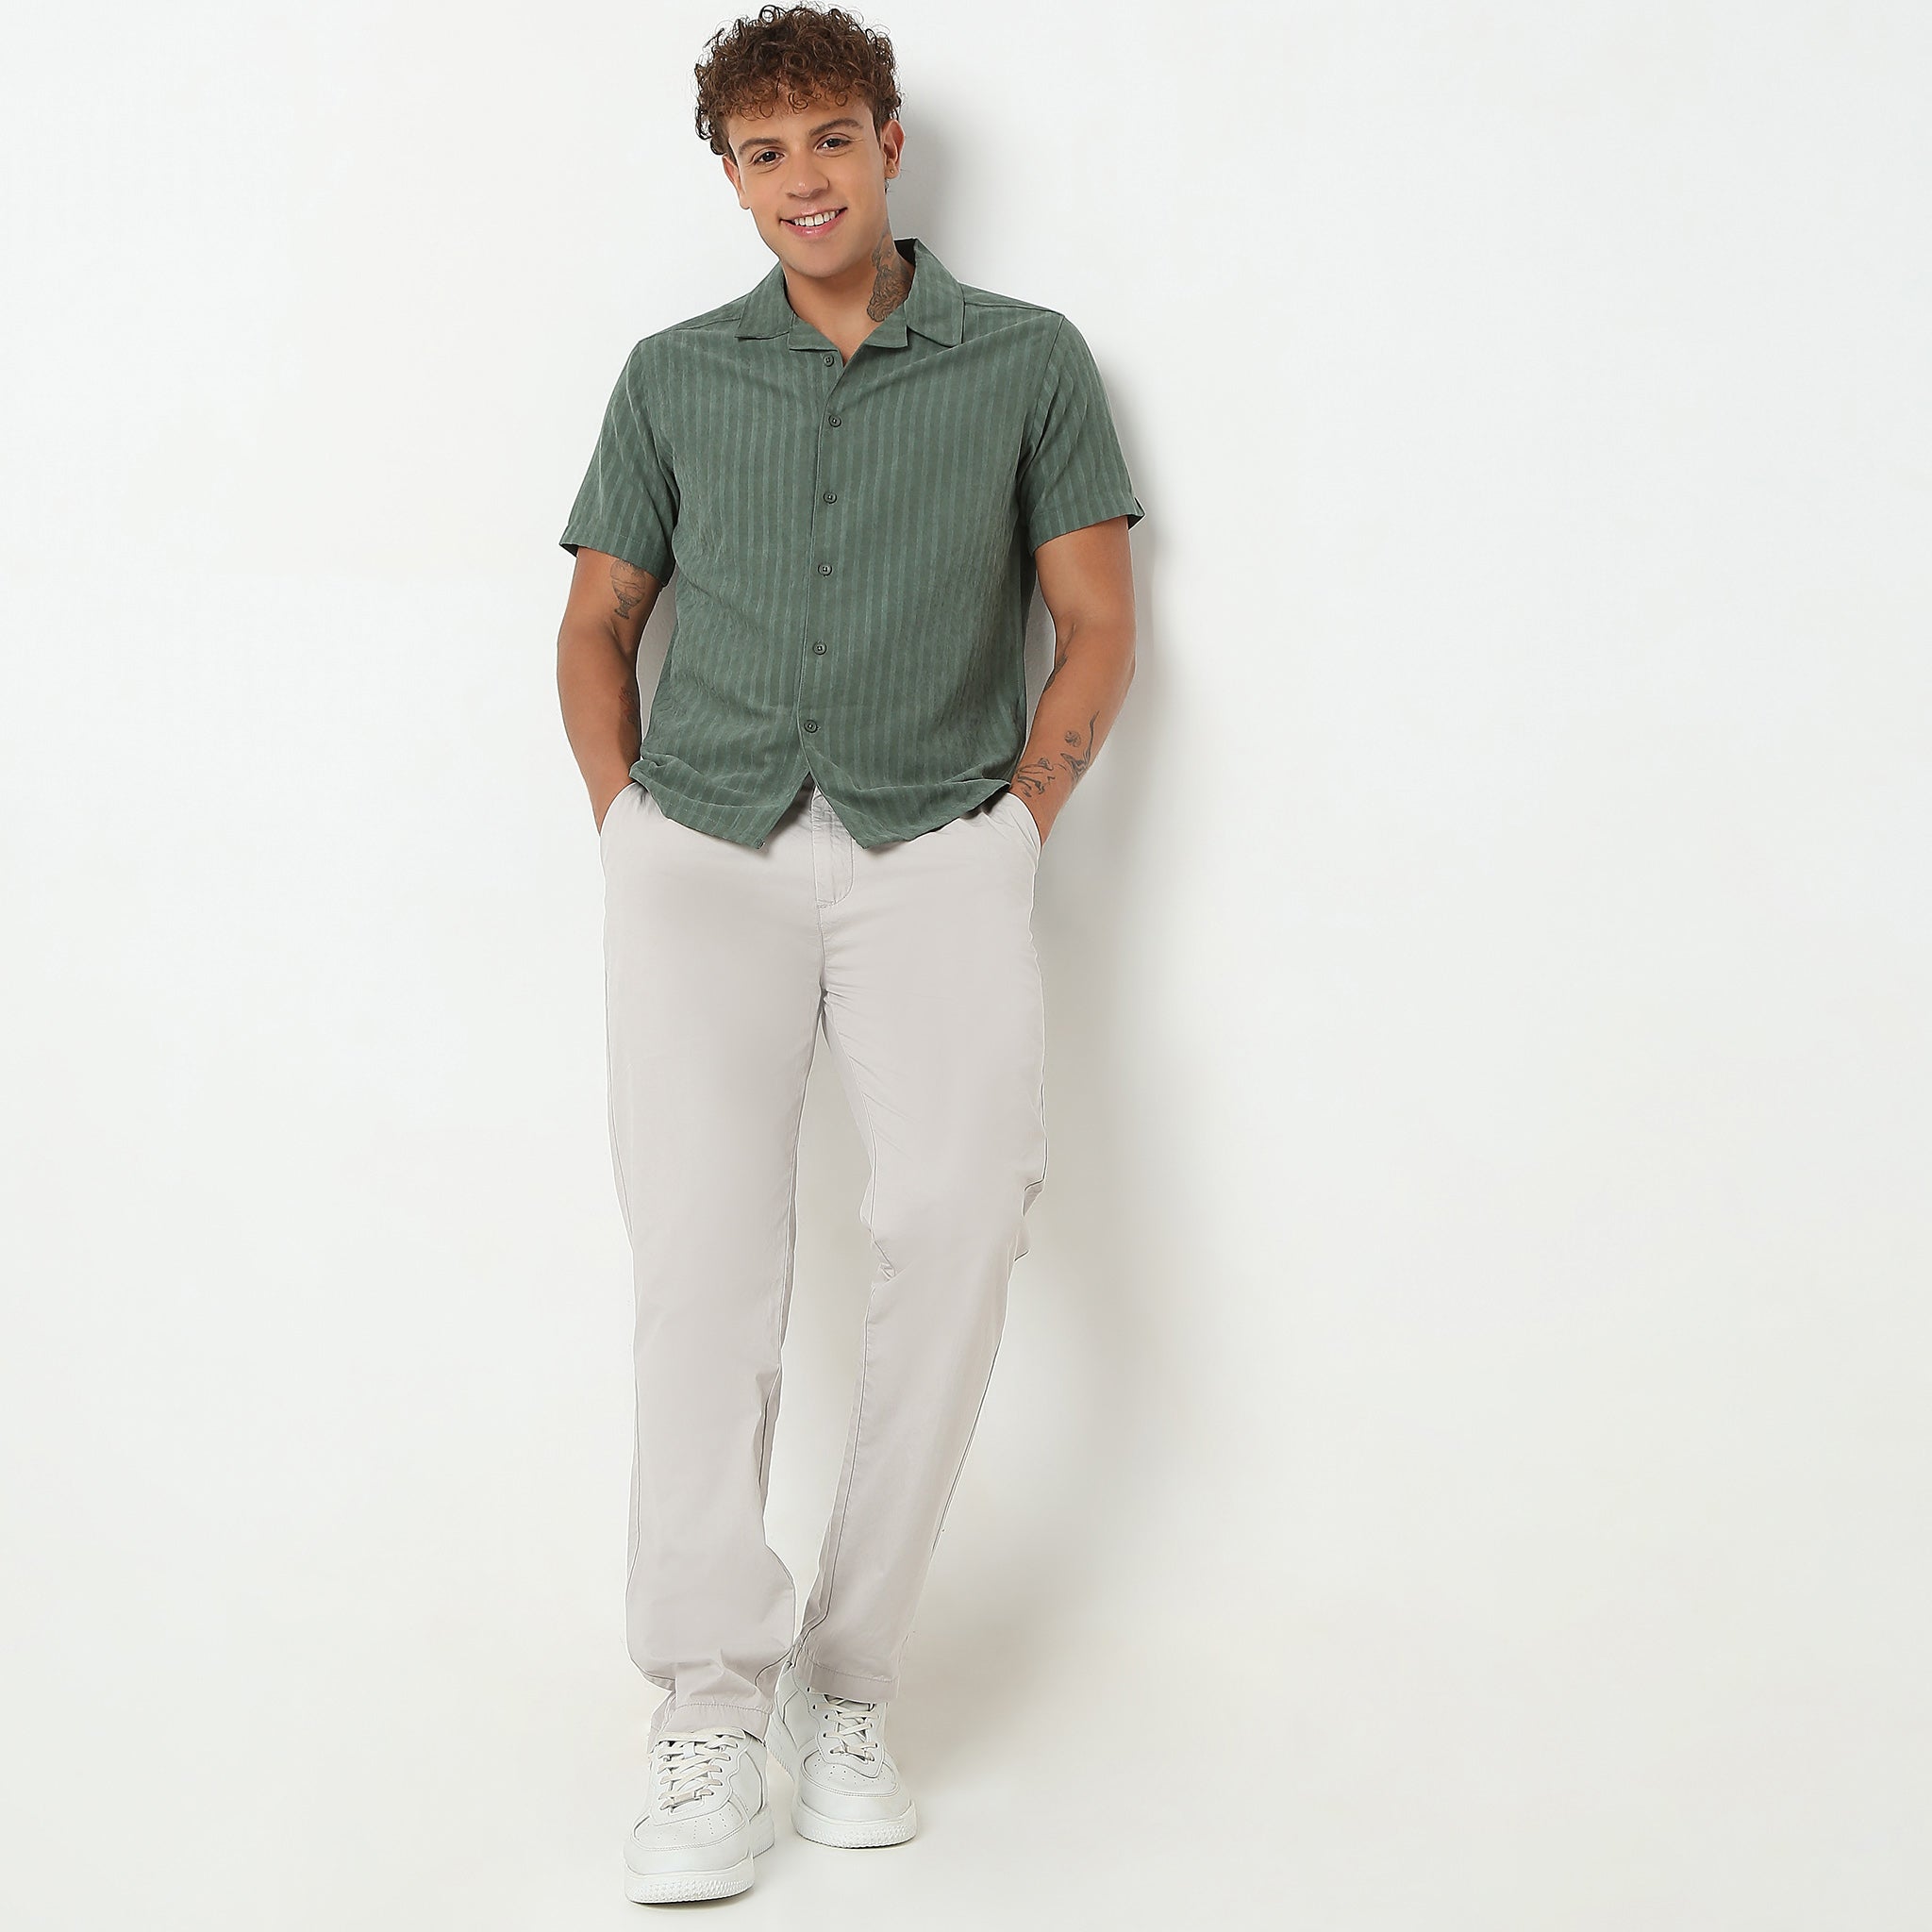 Regular Fit Solid Mid Rise Pants